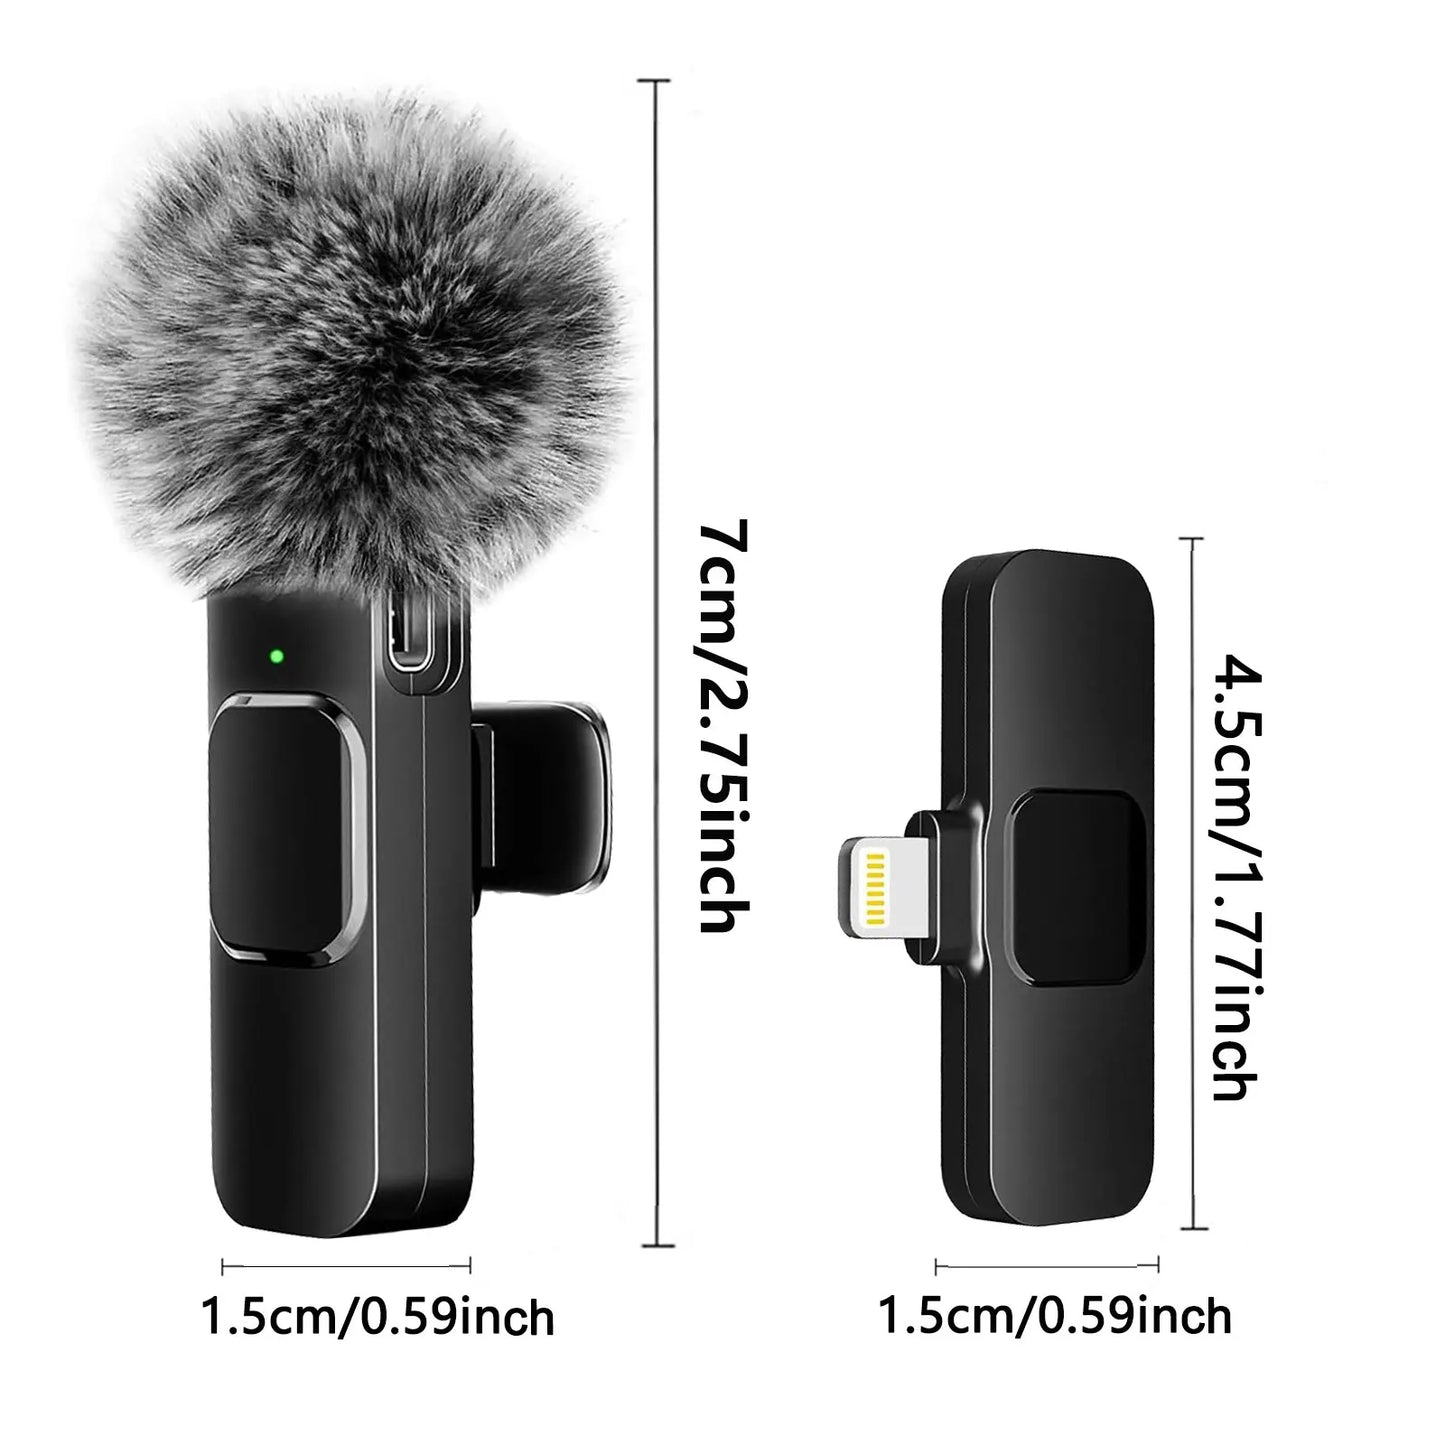 NEW Wireless Lavalier Mini Microphone for iPhone Android